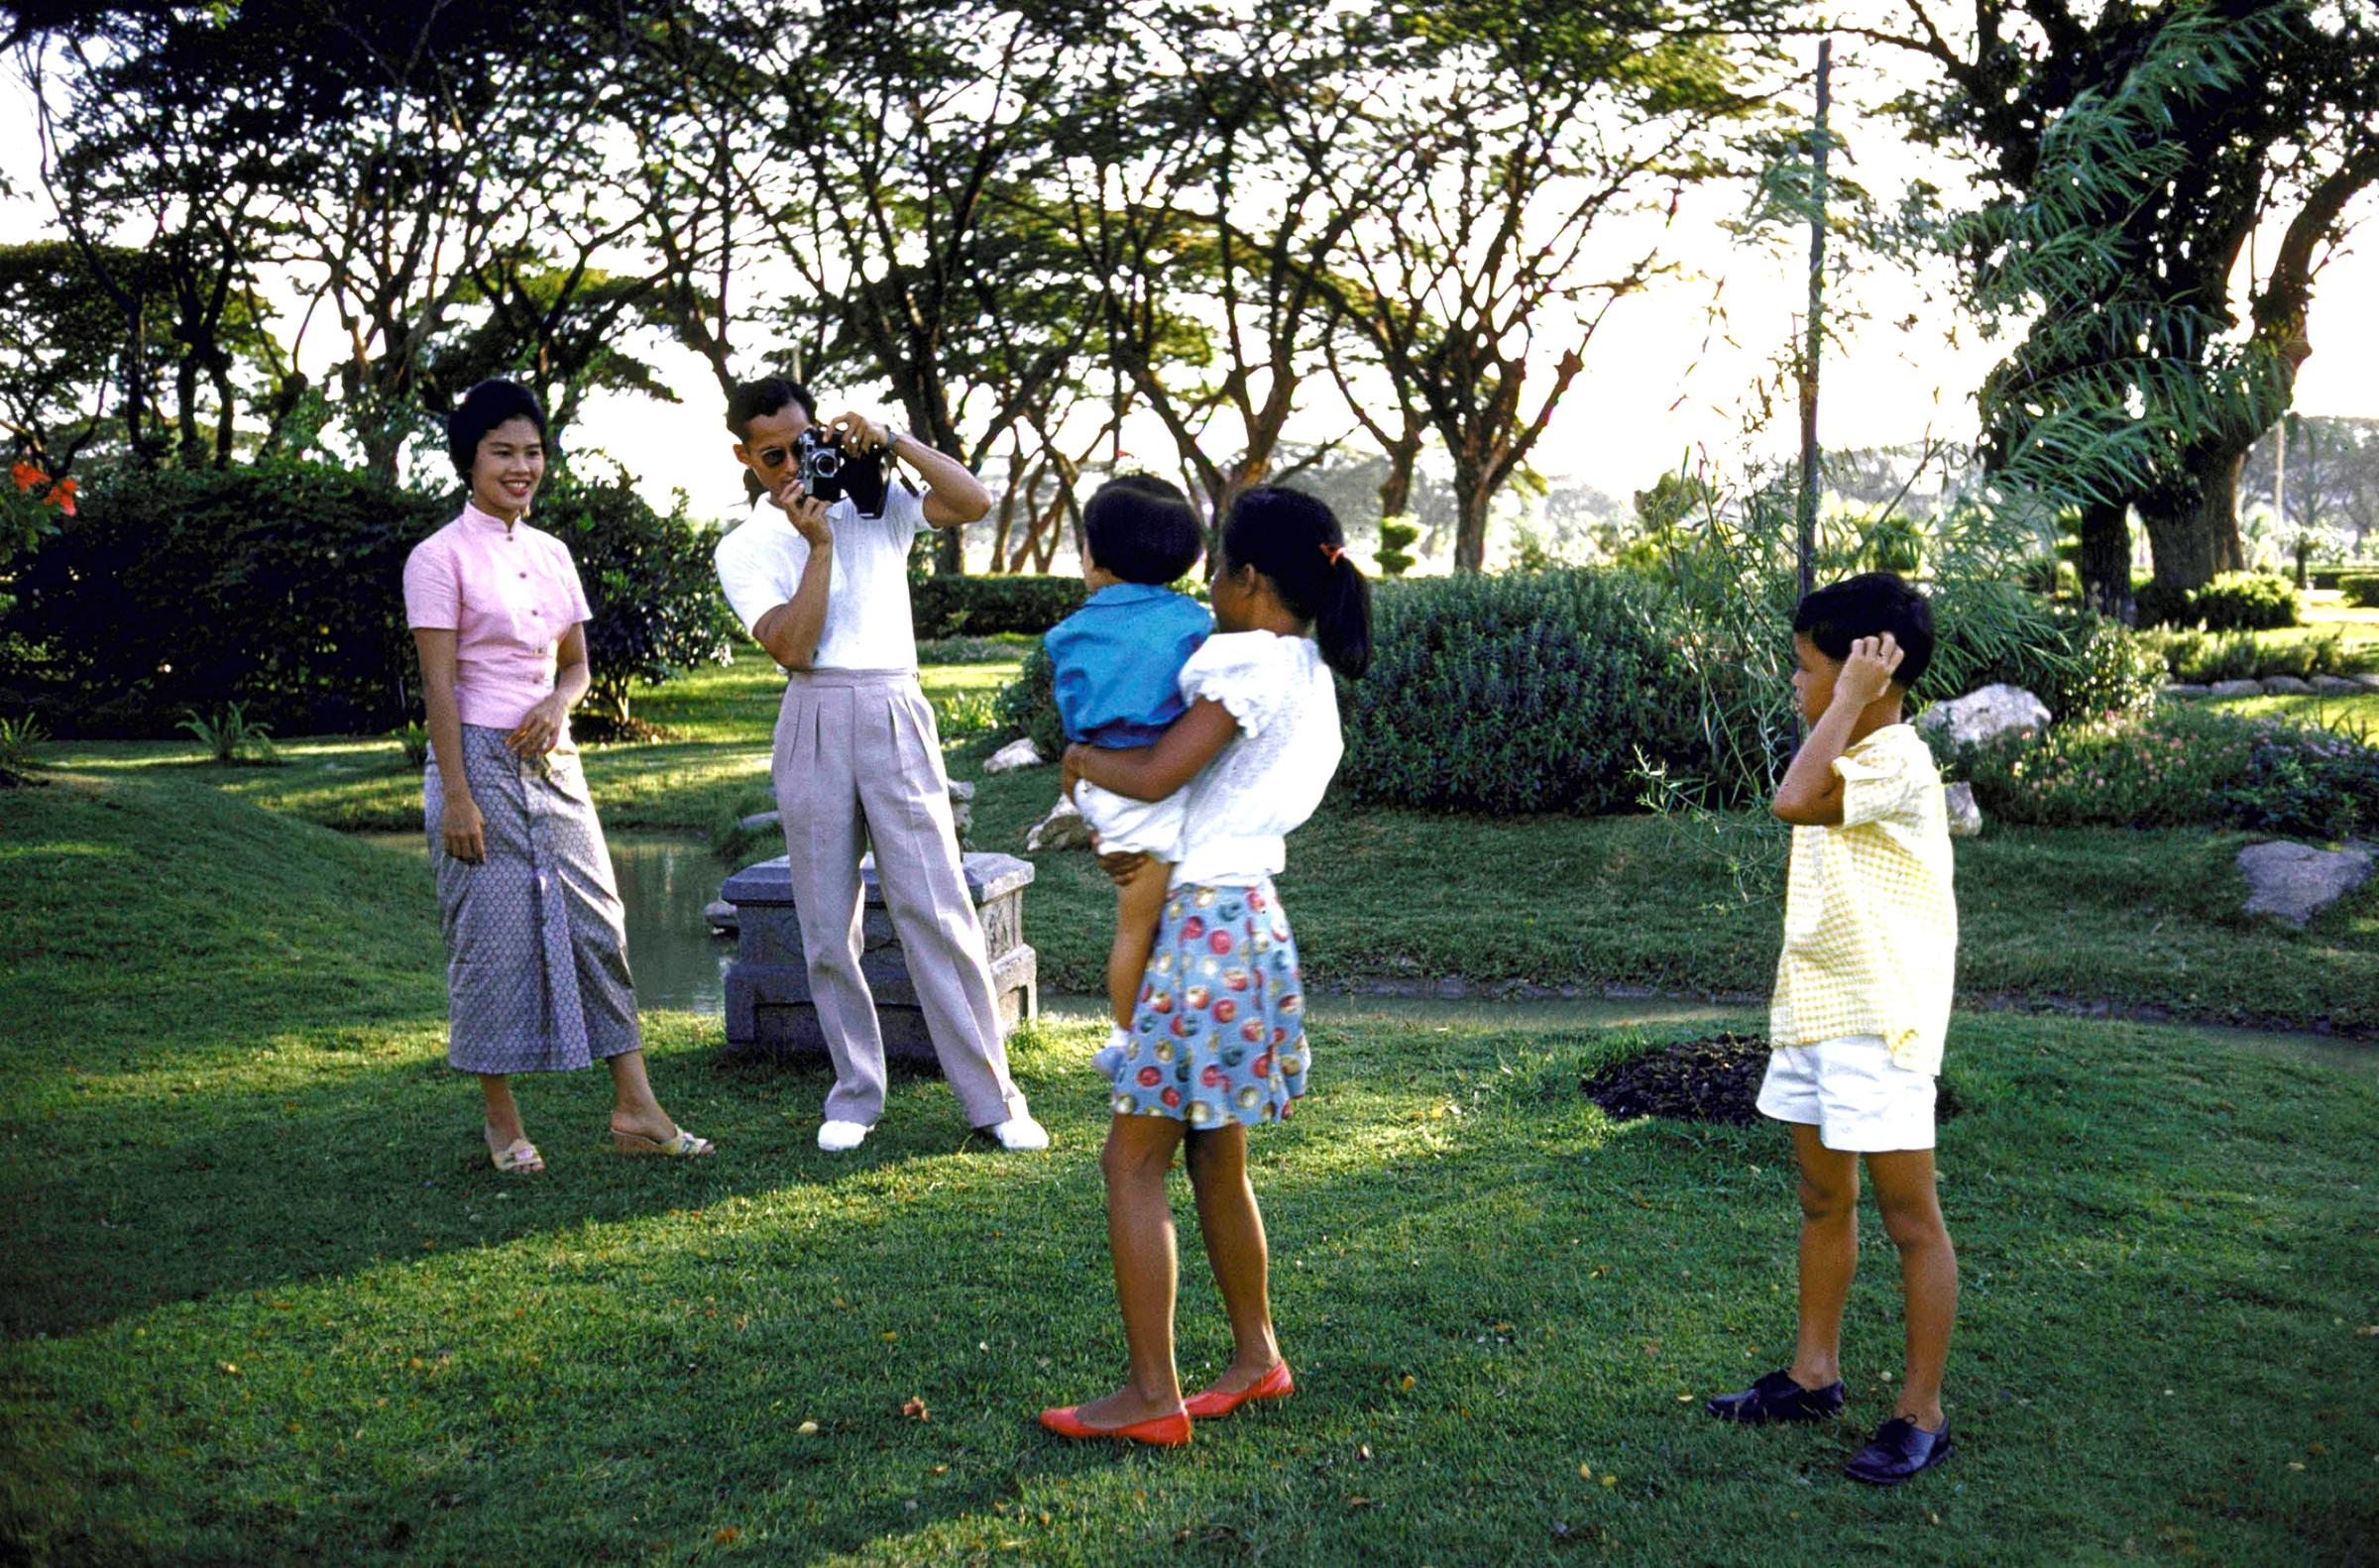 Thailand's King Bhumibol Adulyadej (2L) and Queen Sirikit (L) taking pictures of their children Ubolratana (C), Chulabkorn (in sister's arms) and Vajiralongkorn on palace grounds, 1960.